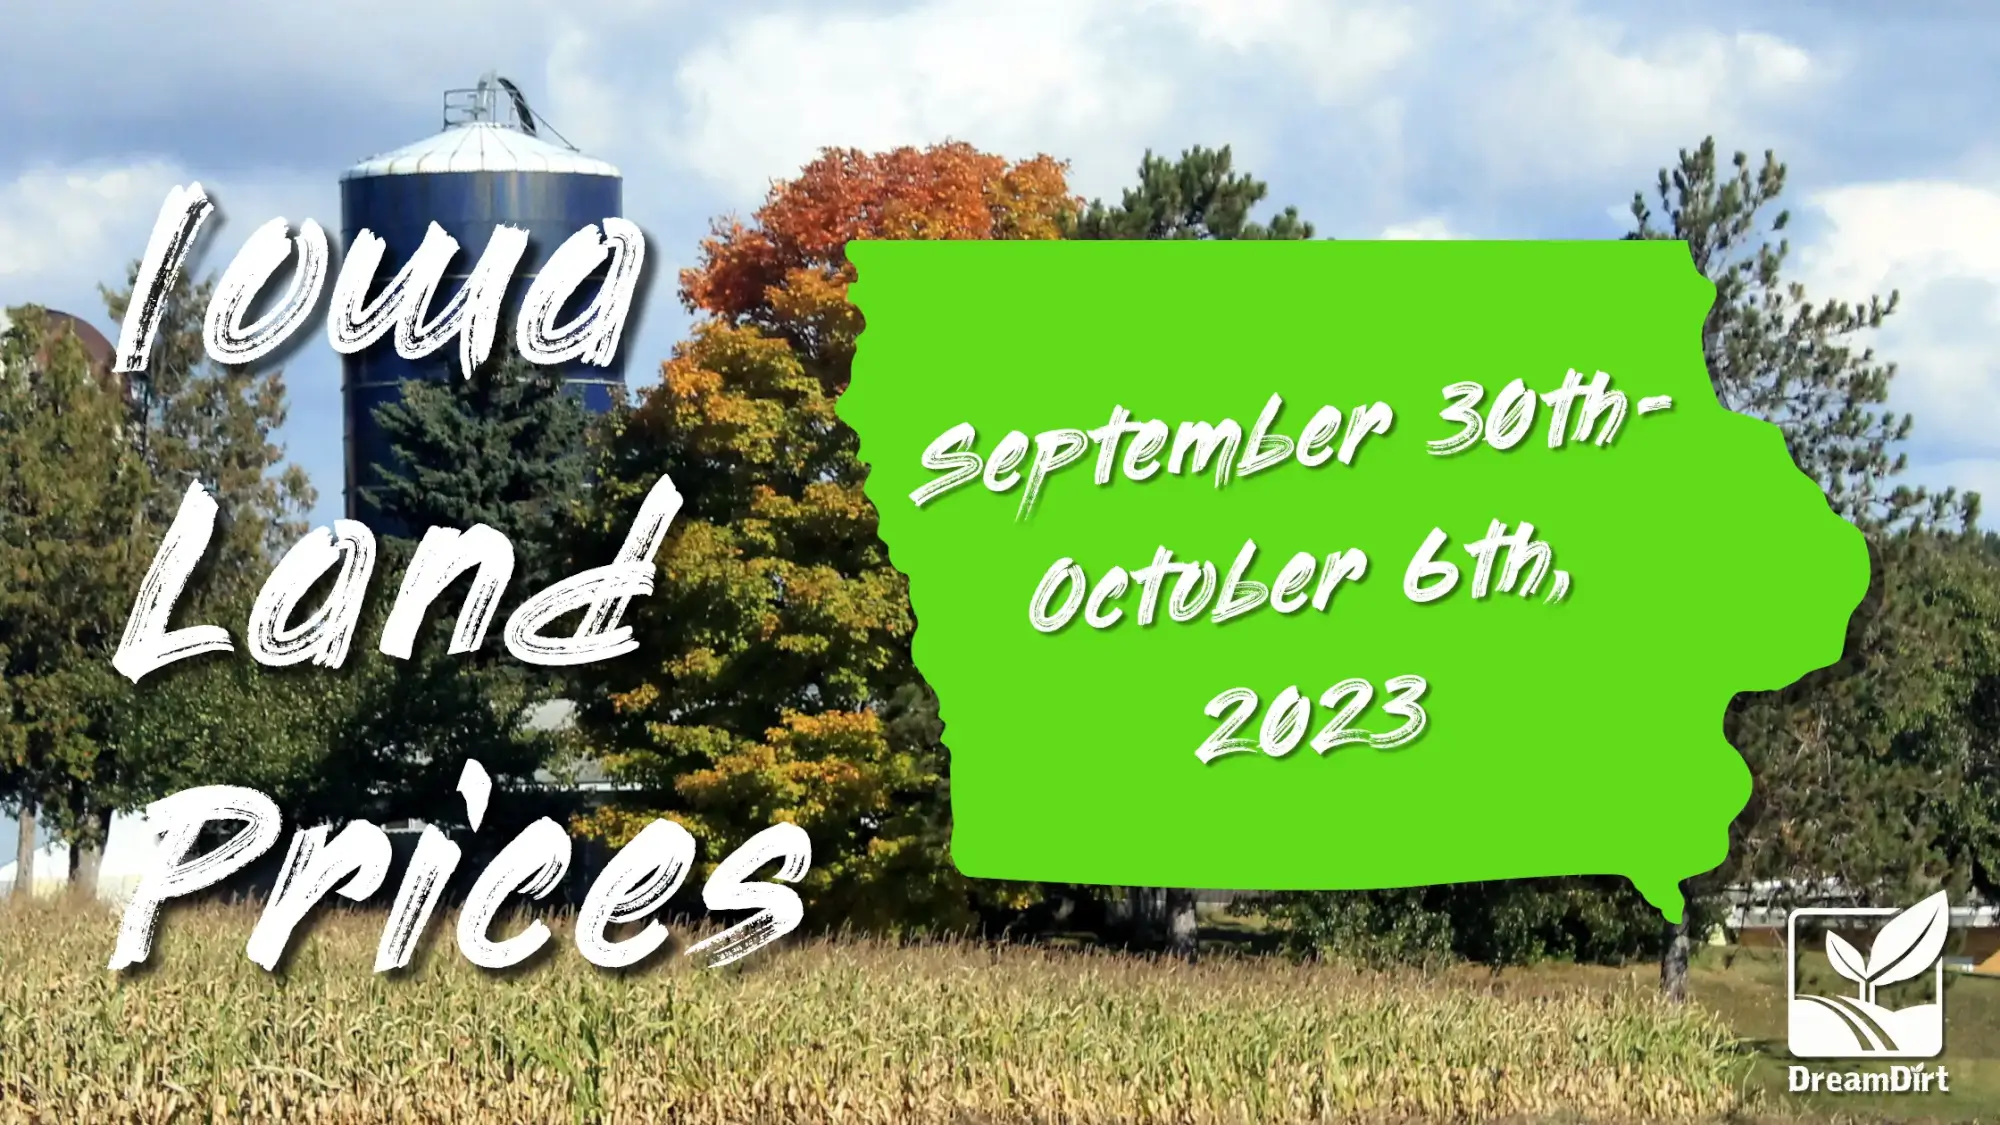 Iowa Farmland Current Prices September 30th - October 6th, 2023 sales